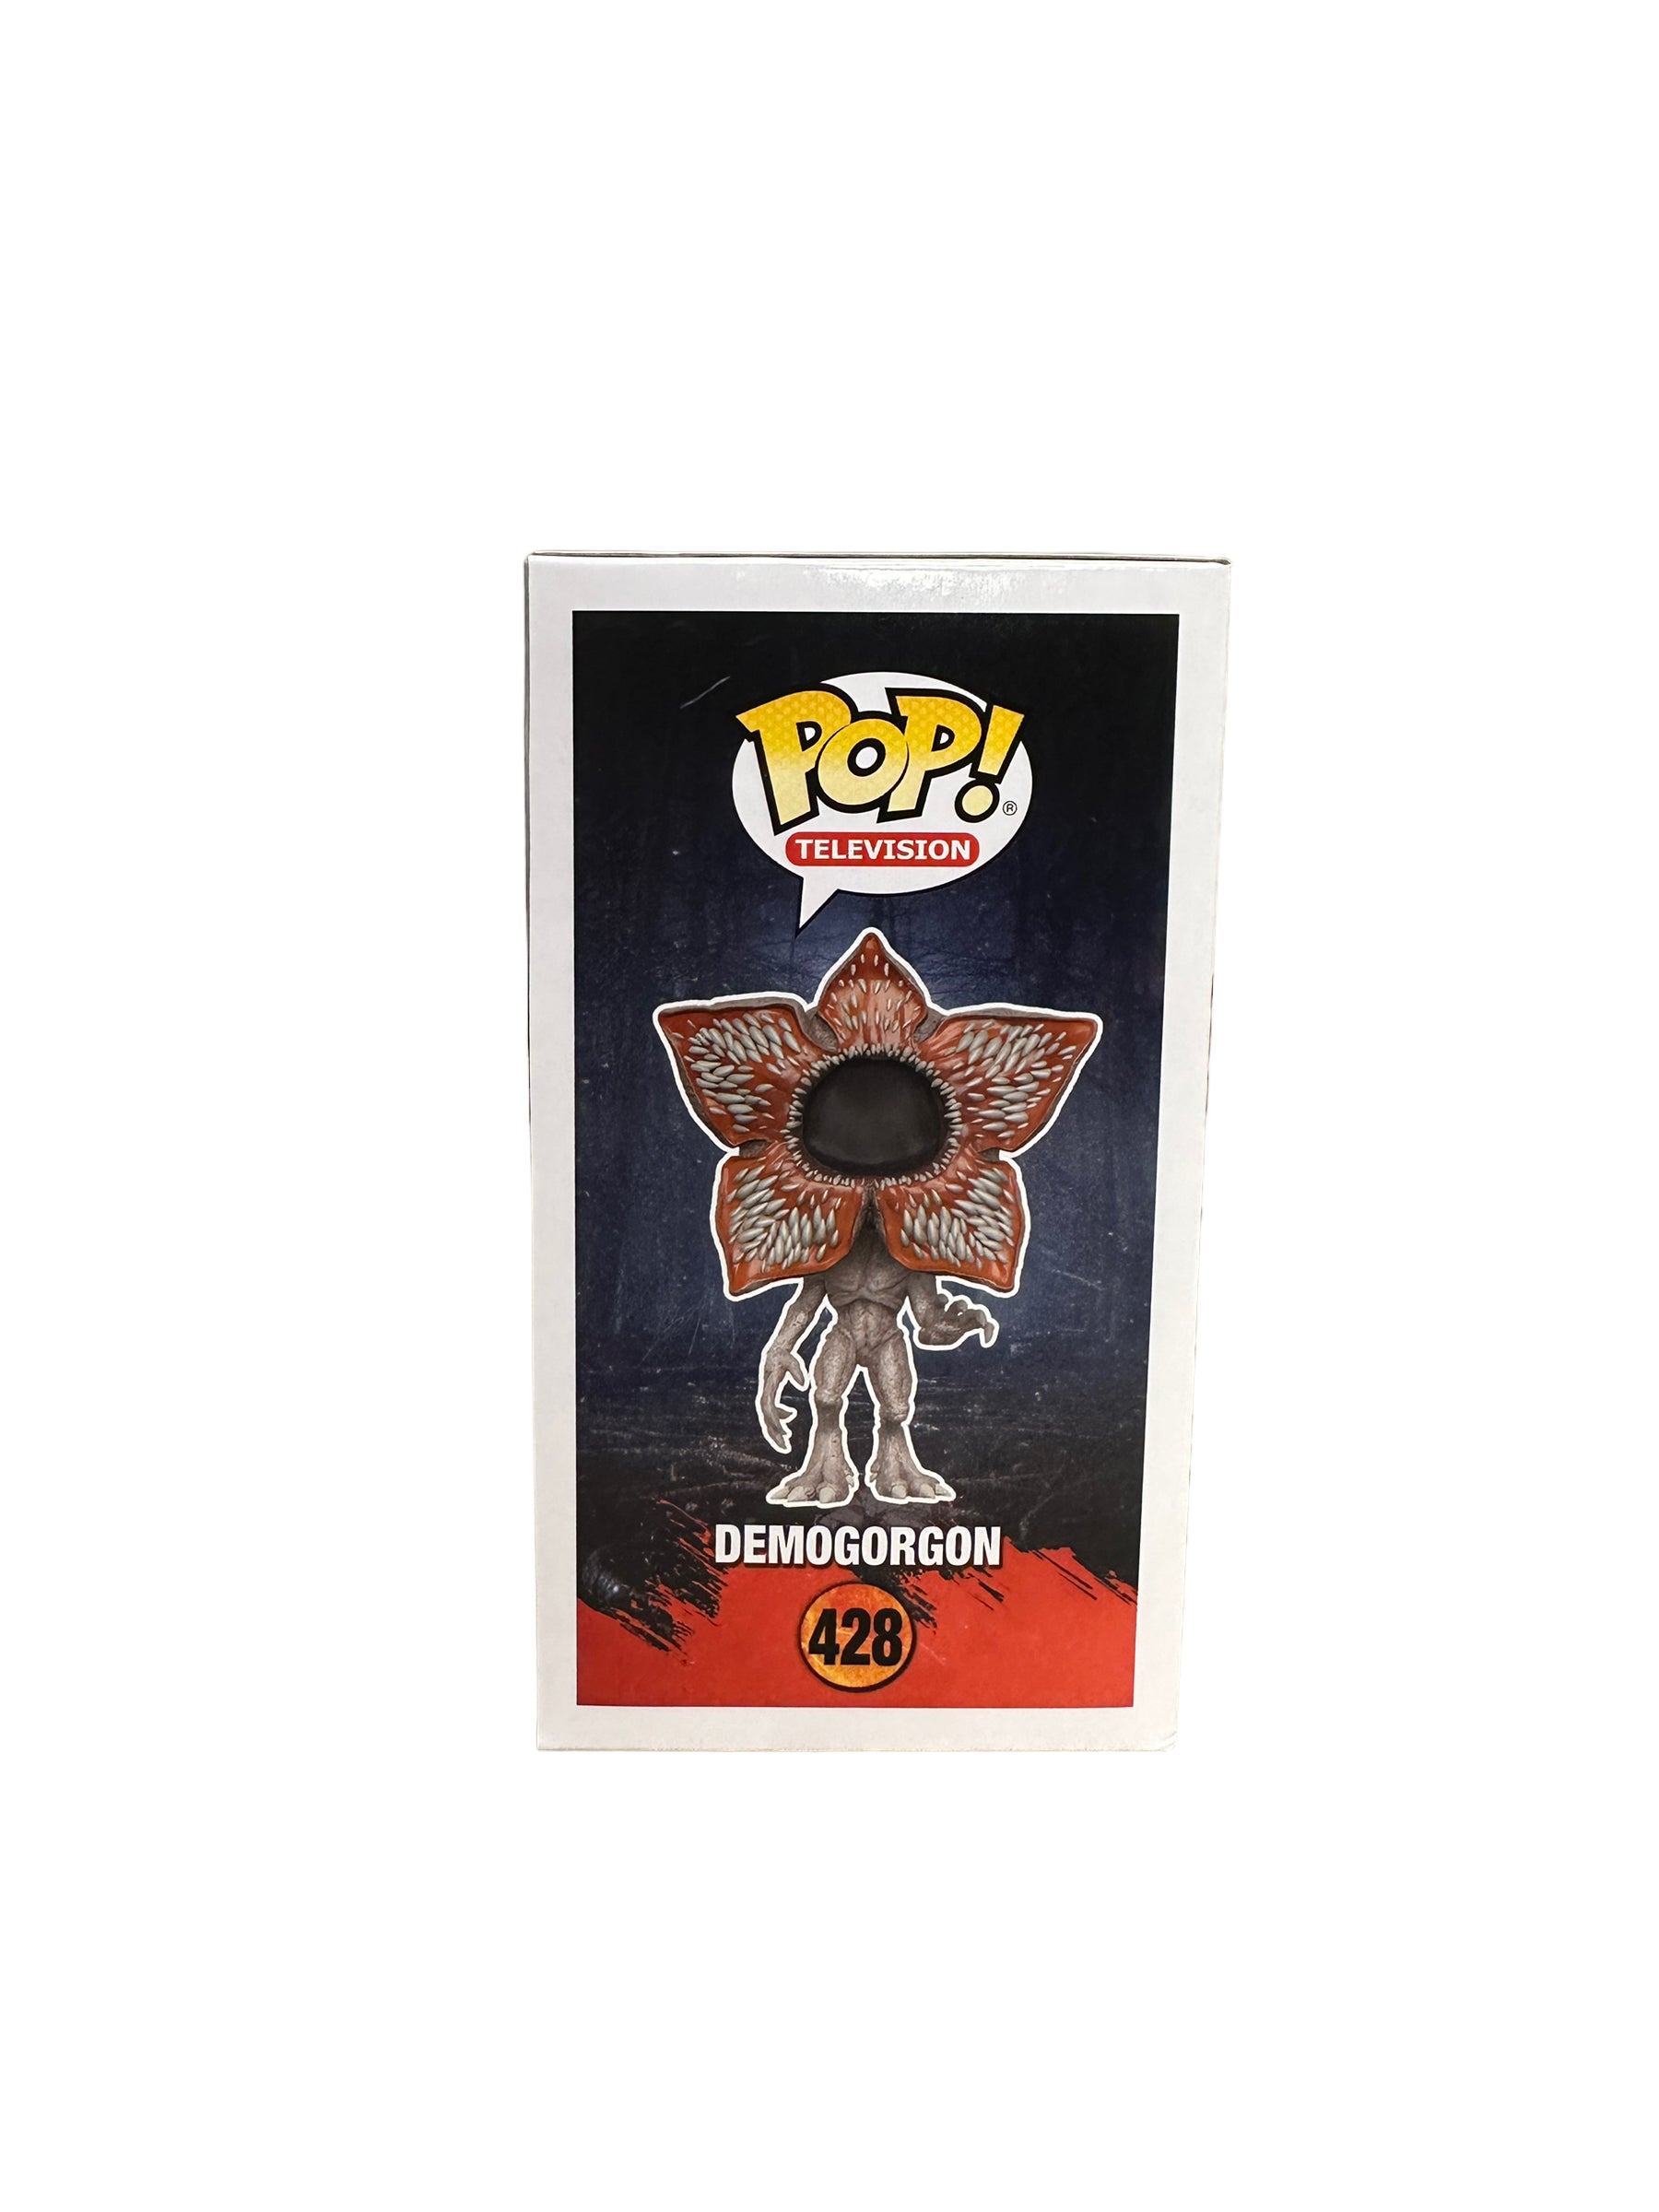 Demogorgon #428 (Glows in the Dark) Funko Pop! - Stranger Things - SDCC 2022 Shared Exclusive LE3000 Pcs - Condition 8.75/10